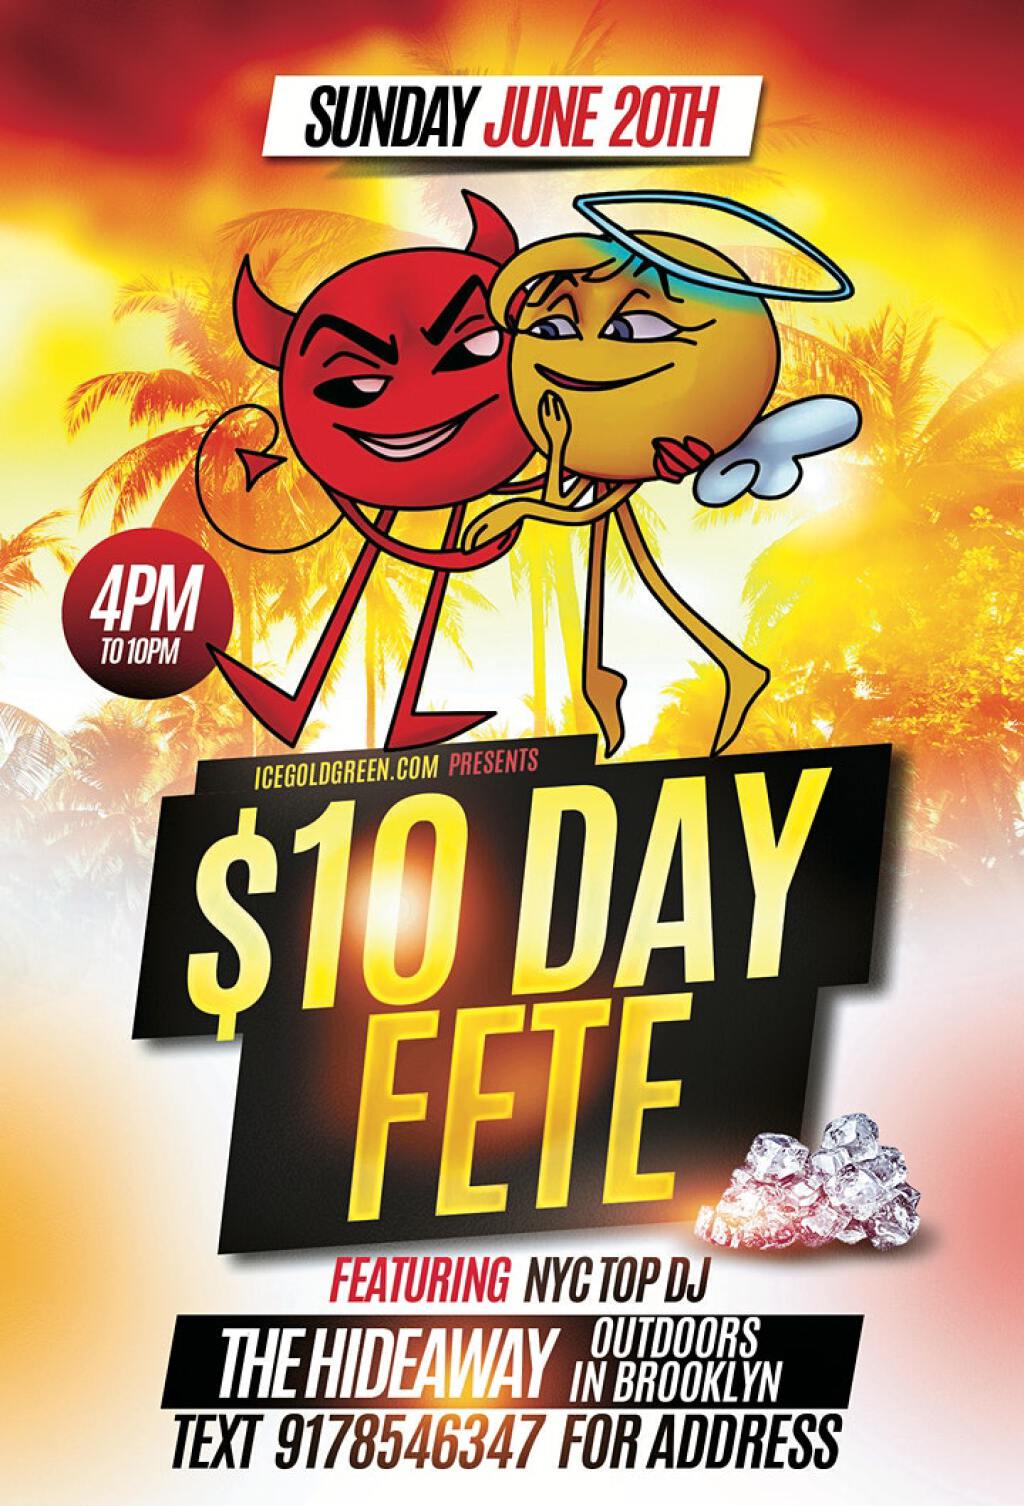 $10 Day Fete flyer or graphic.